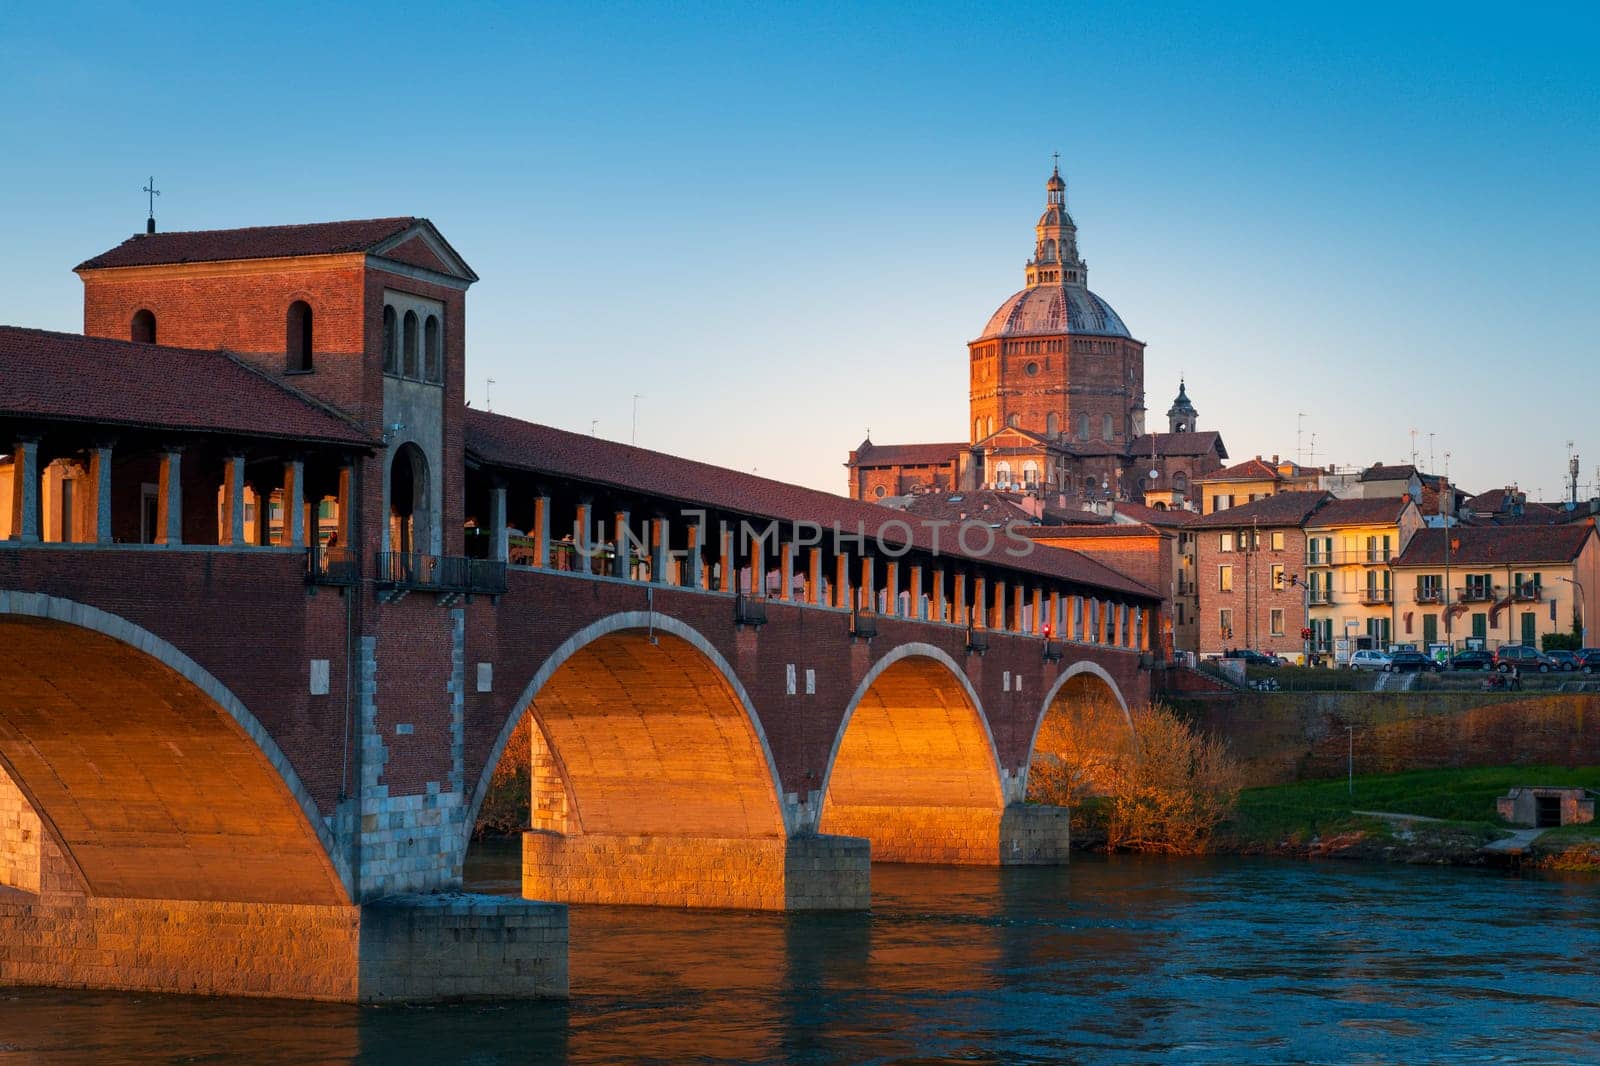 Panorama of Ponte Coperto (covered bridge) and Duomo di Pavia (Pavia Cathedral) in Pavia at sunset, Lombardy, italy.